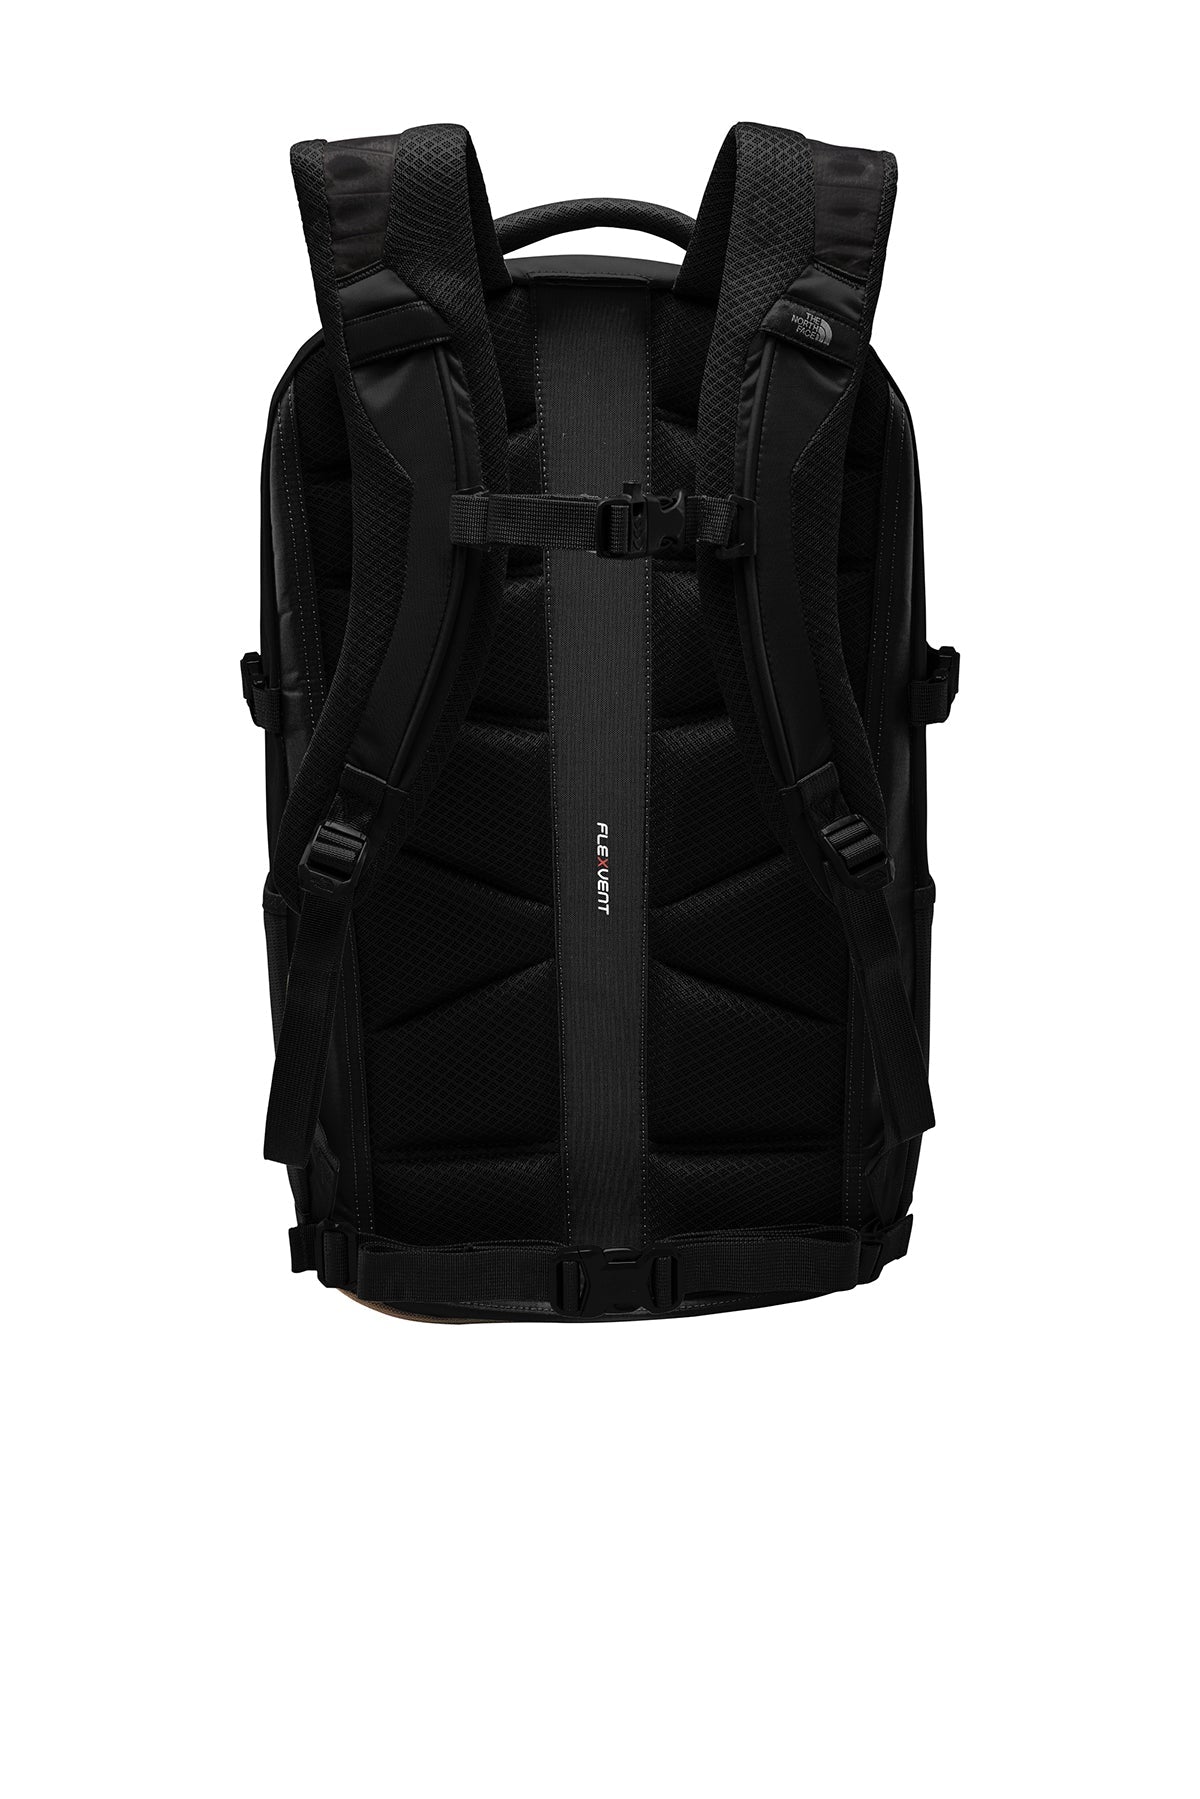 North Face Fall Line Backpack TNF Black